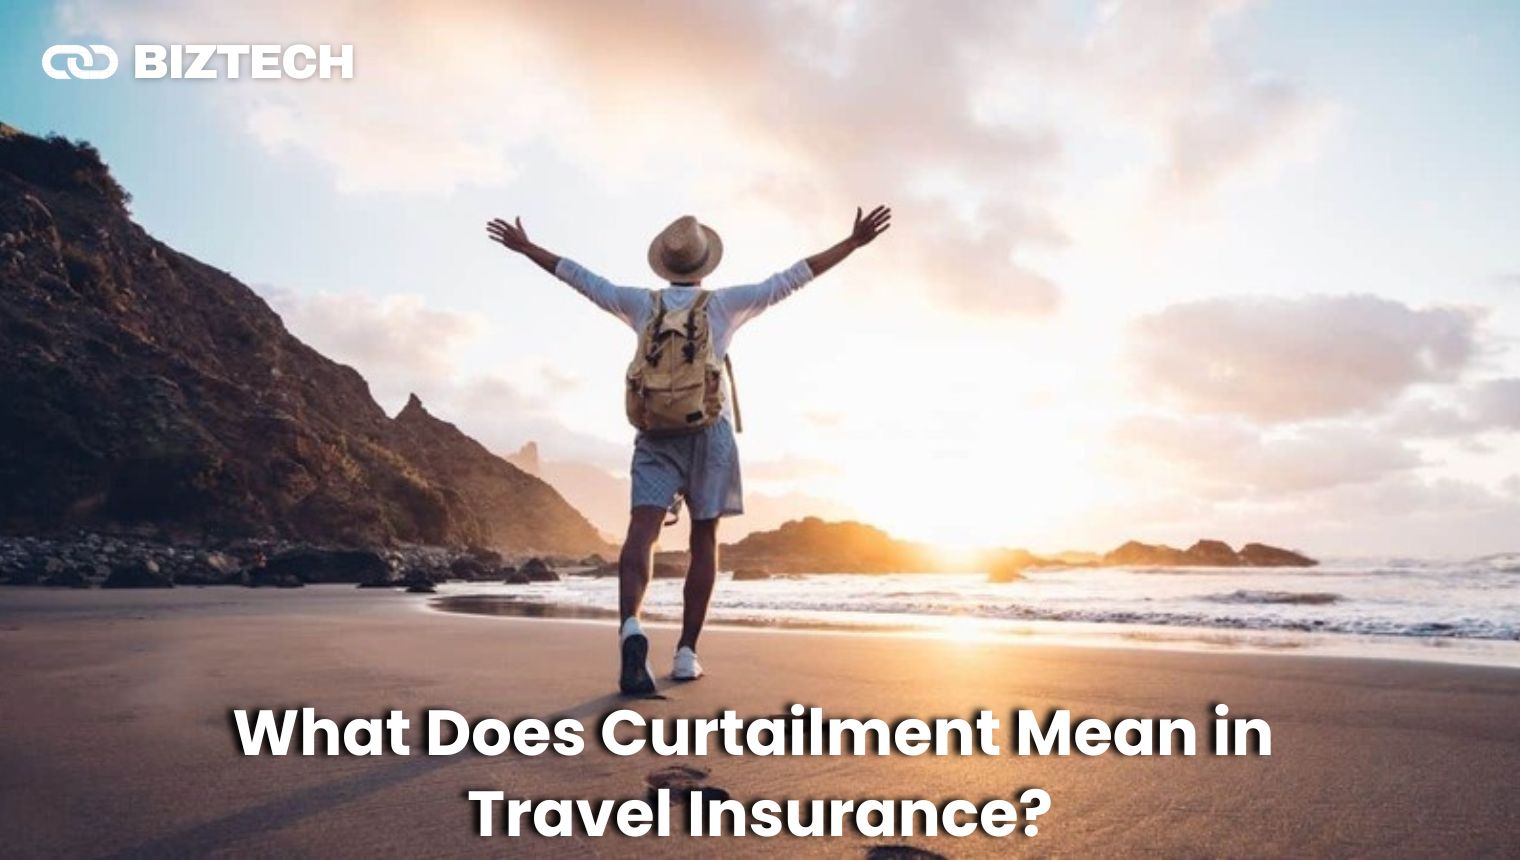 What Does Curtailment Mean in Travel Insurance?